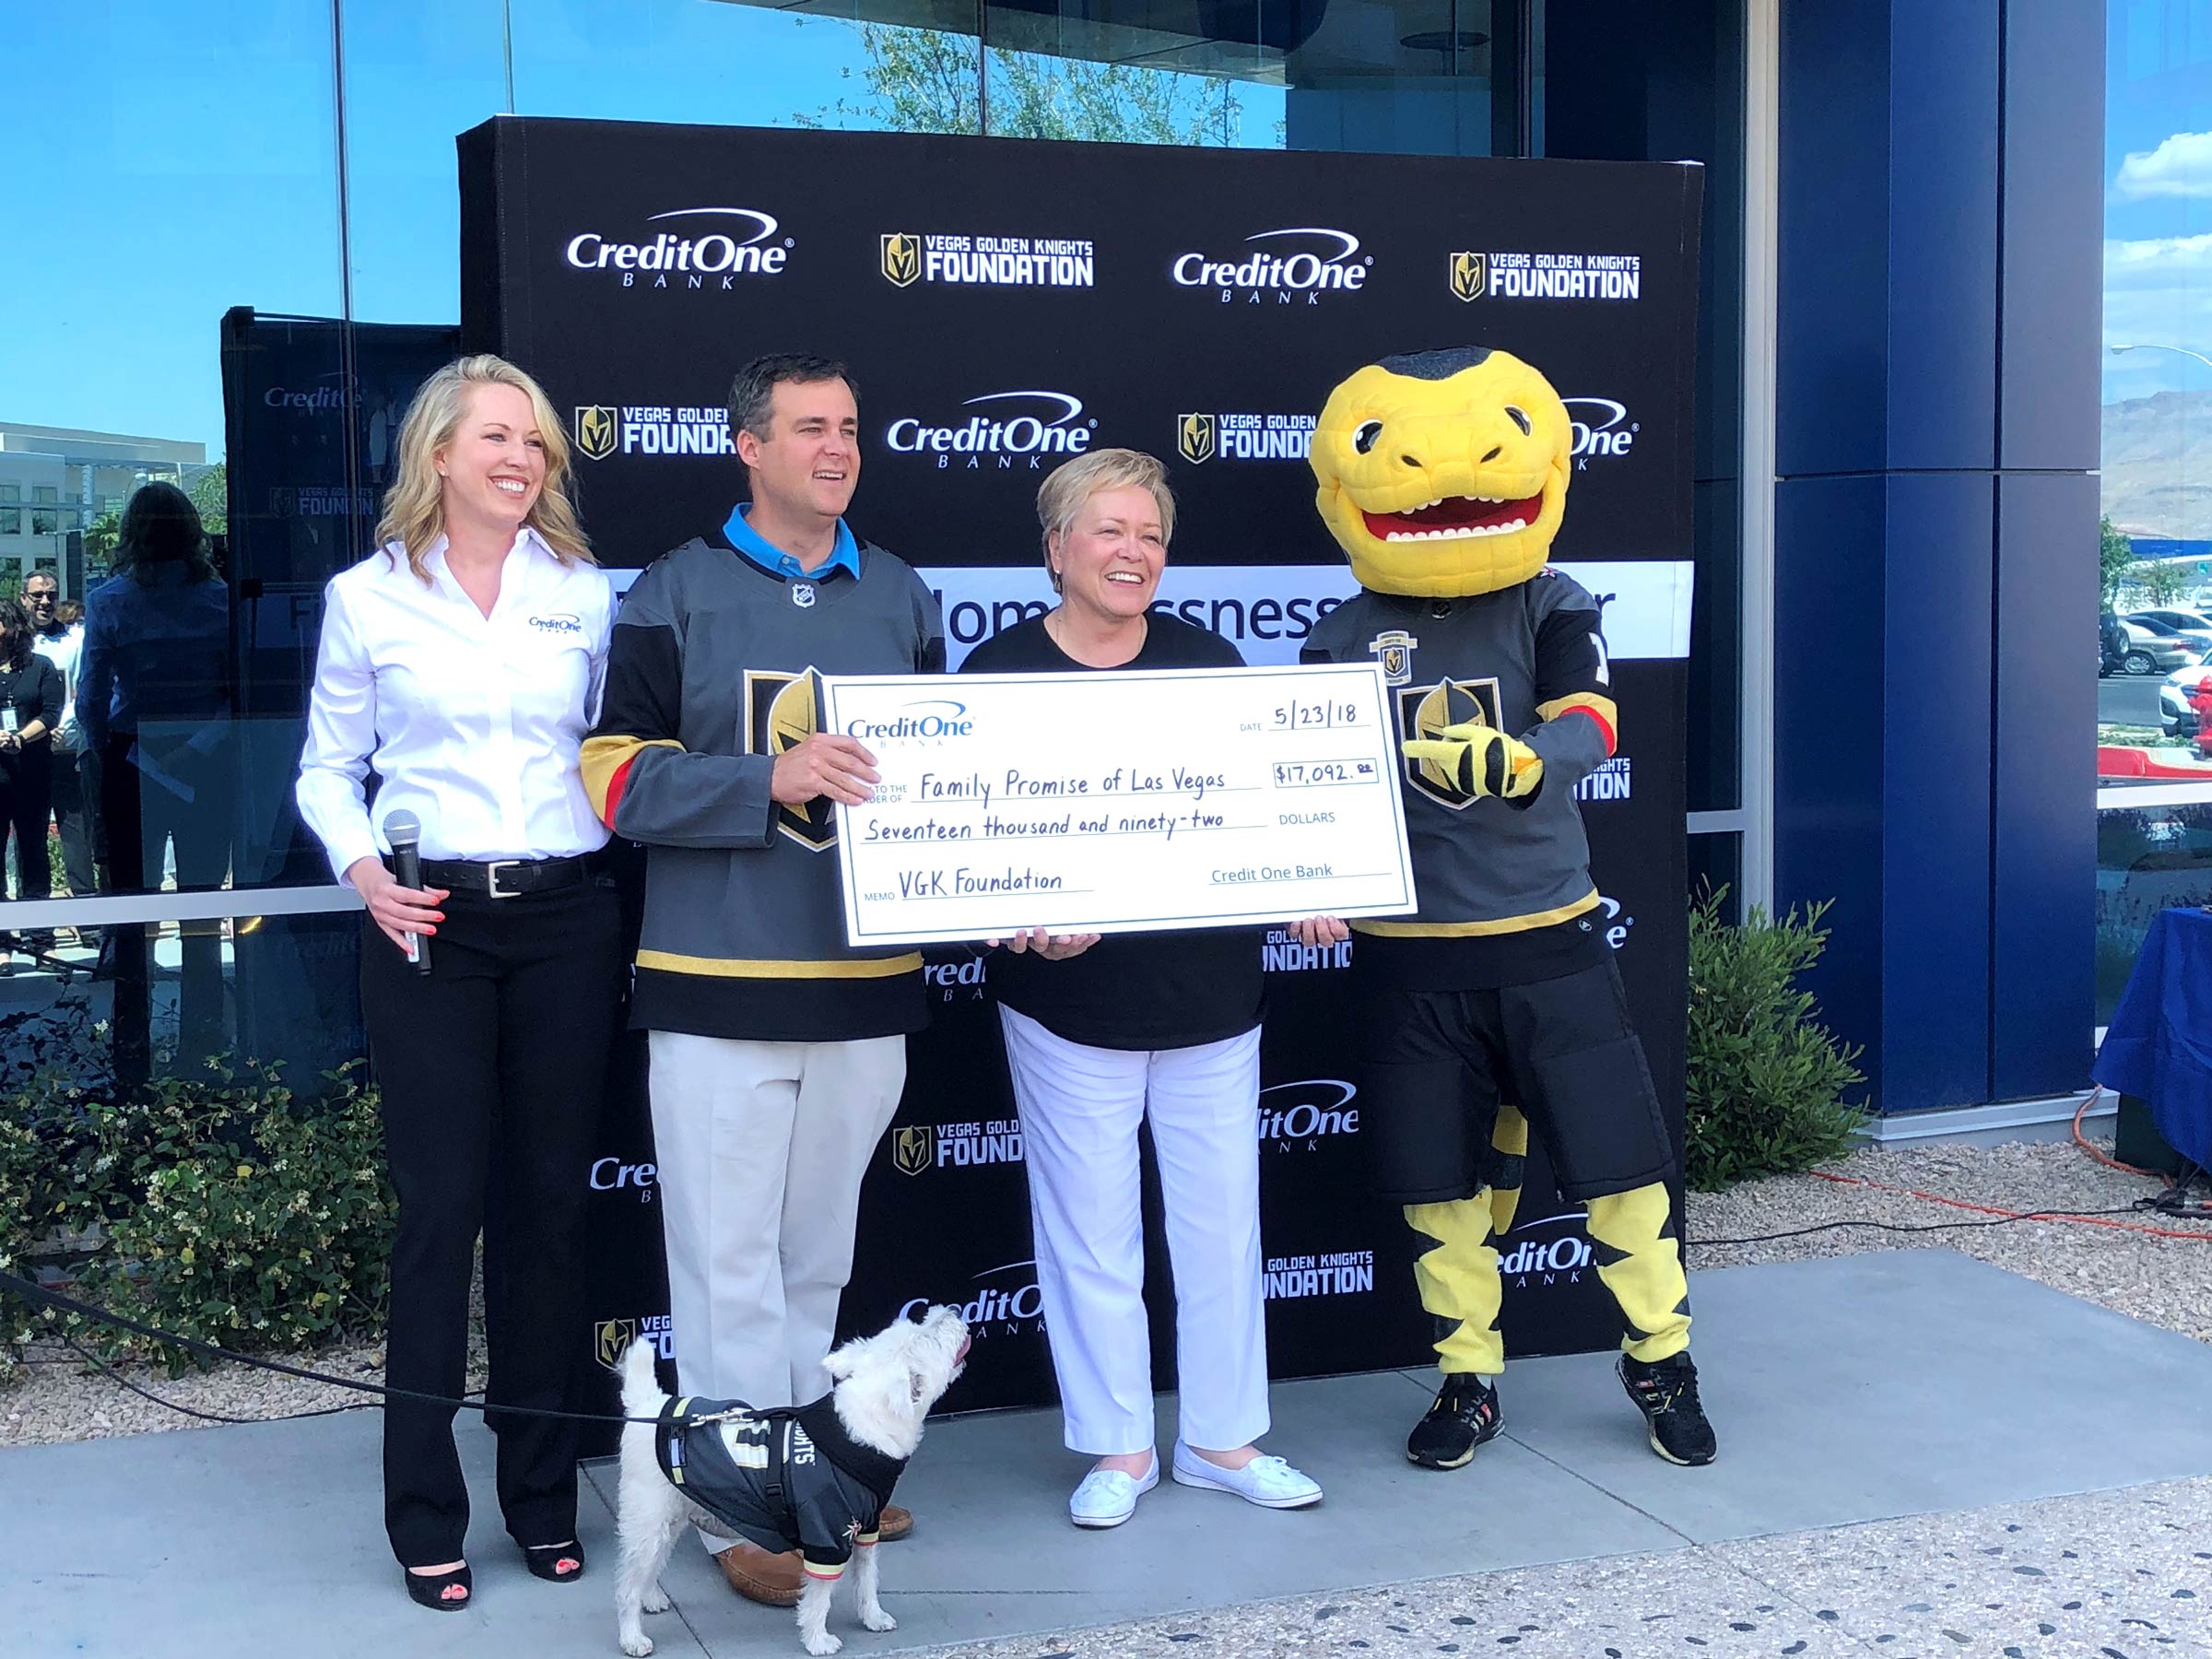 alt="Credit One Bank and Vegas Golden Knights Foundation donation to Family Promise of Las Vegas and The Shade Tree"